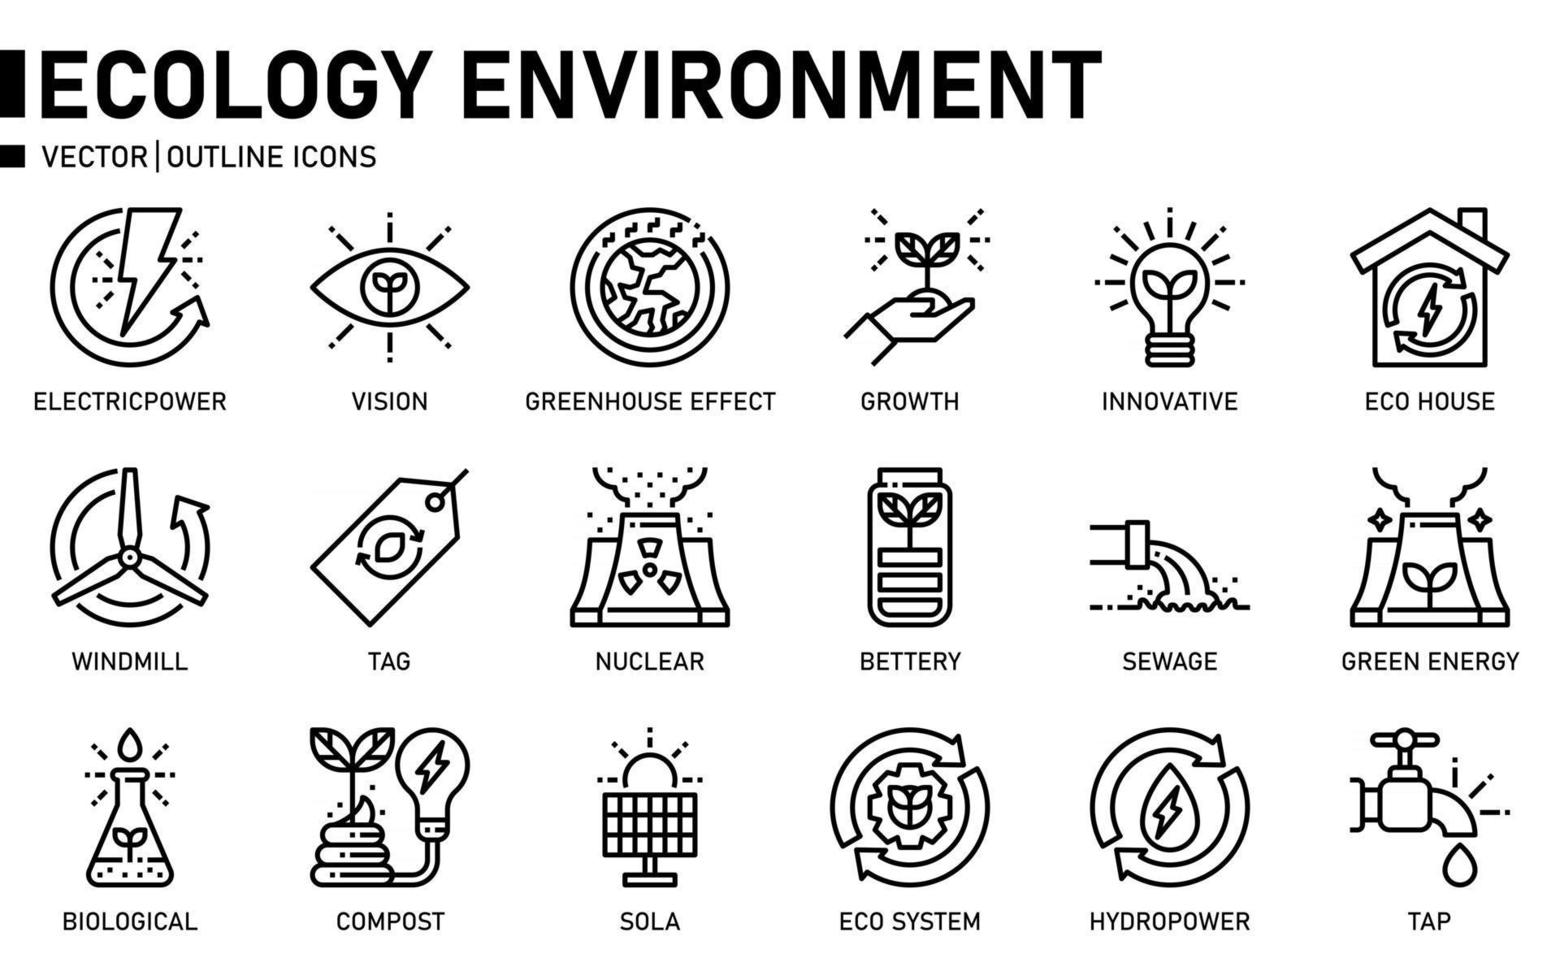 Ecology Environment Outline Icon vector